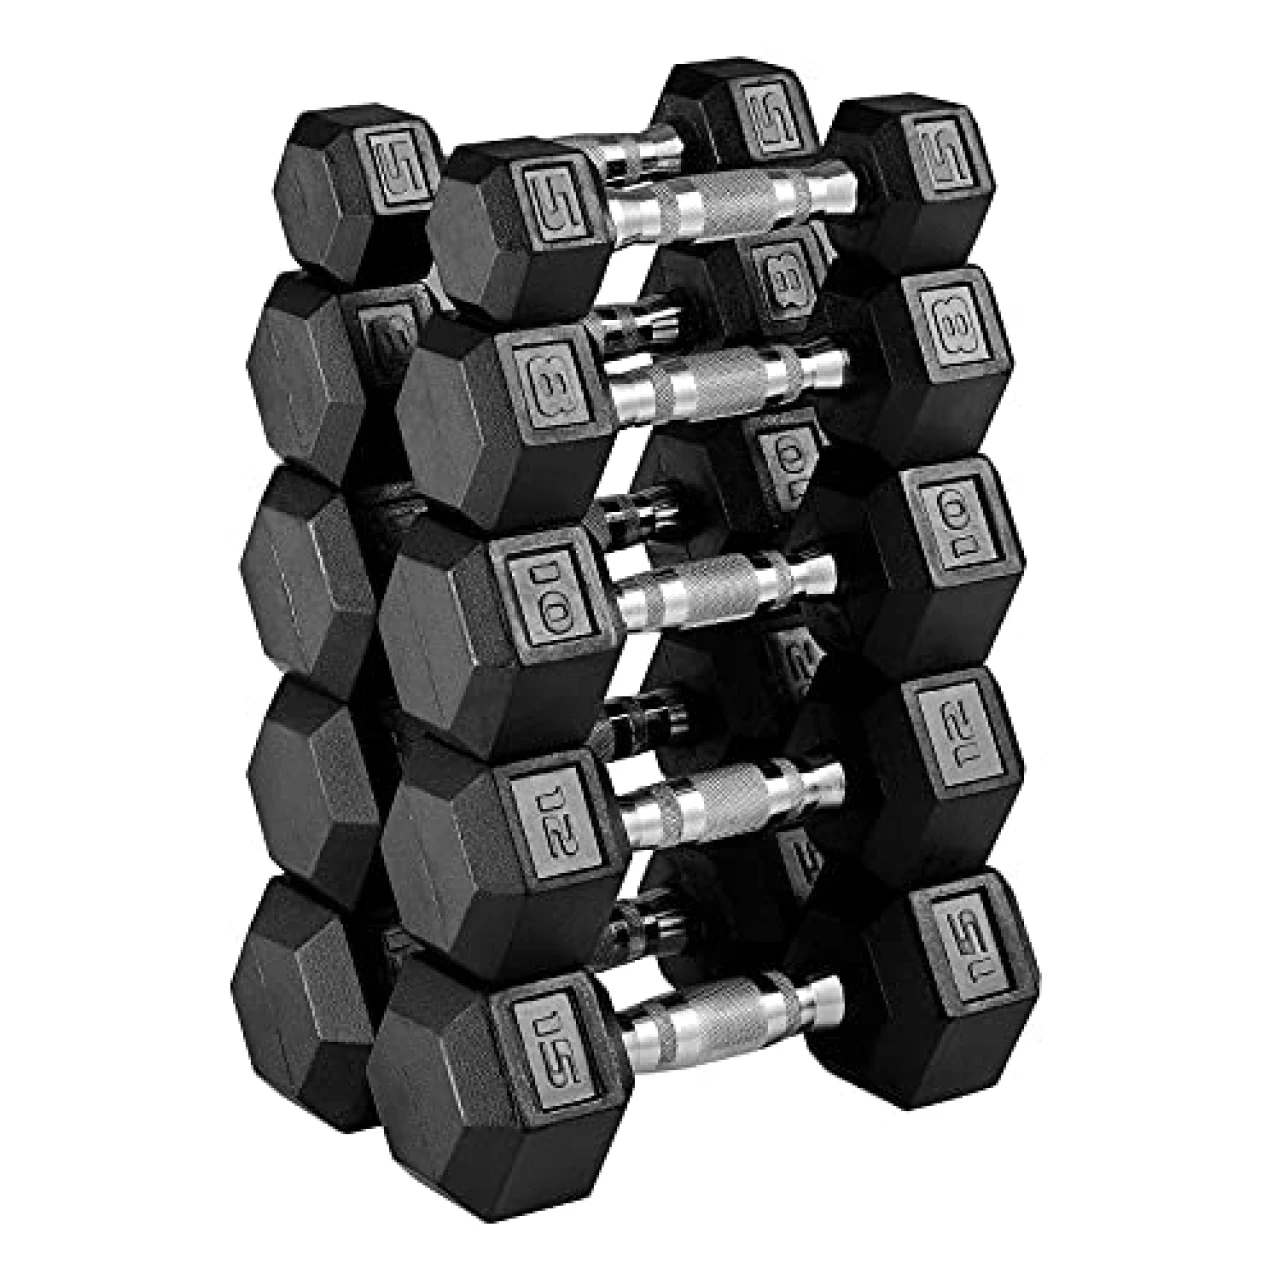 papababe Dumbbell Set Rubber Encased Hex Dumbbell Free Weights Home Weight Set (A Pair of 5 8 10 12 15 LB Dumbbell NO Rack)